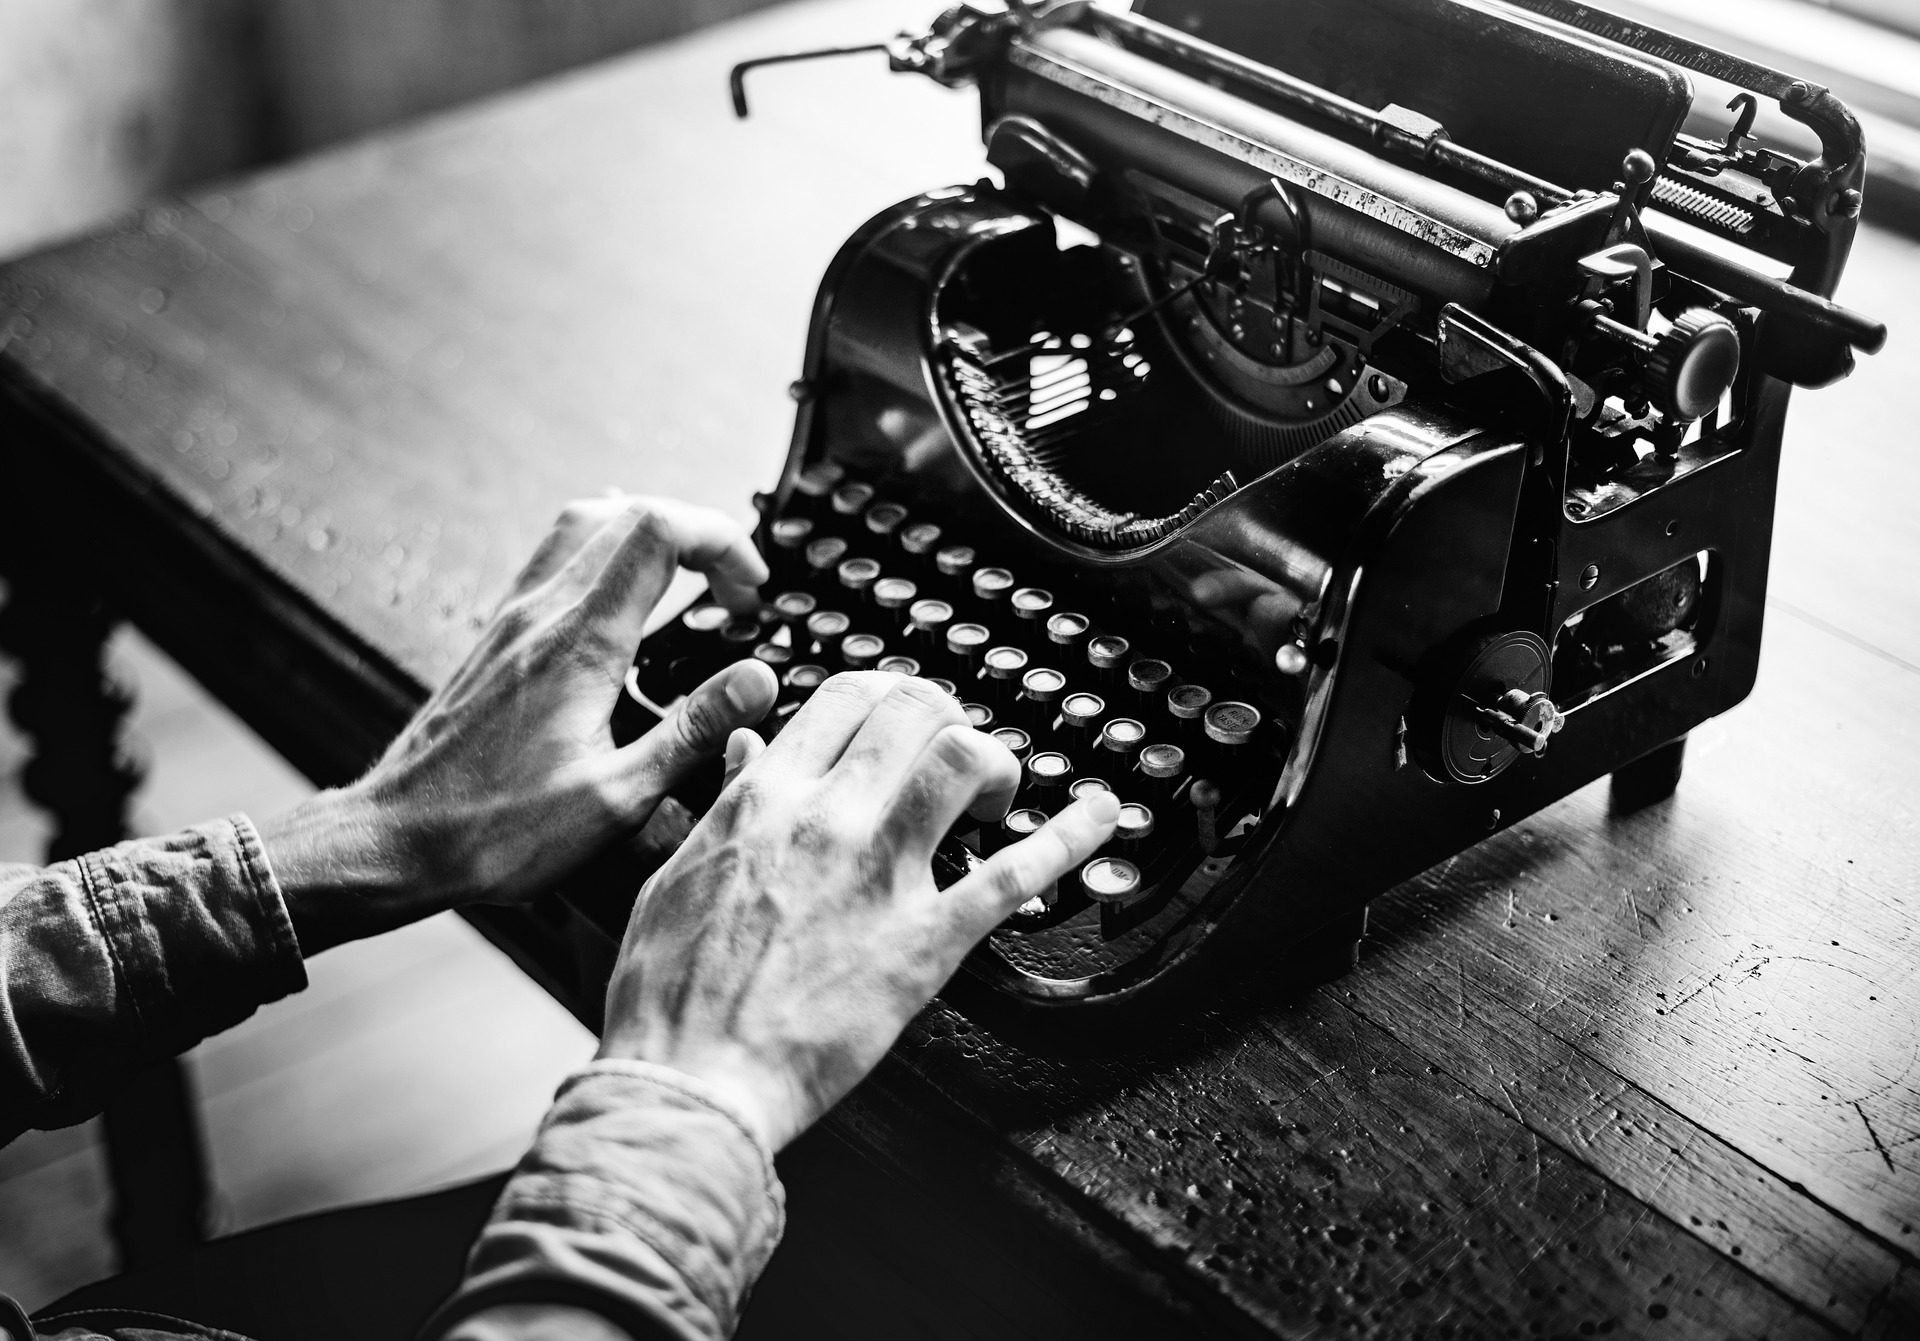 Typing on the Typewriter, Activity, Human, Machine, Object, HQ Photo